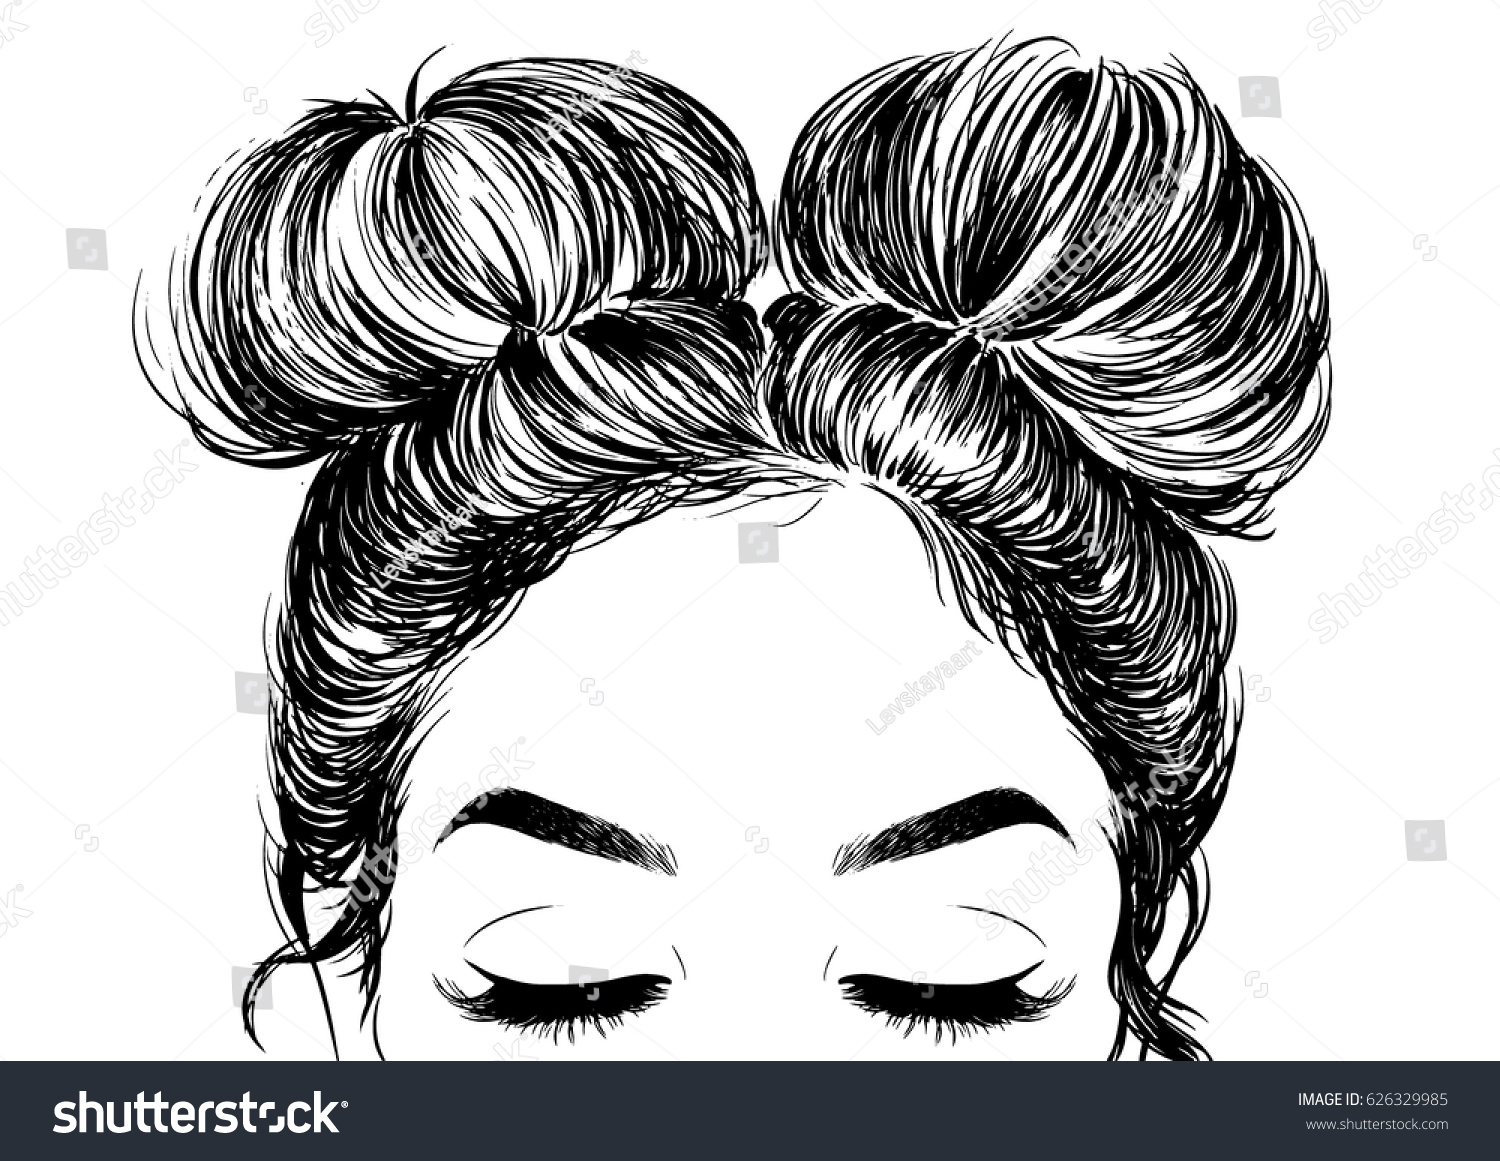 Hairstyle Double Buns Stock Vector 626329985 - Shutterstock